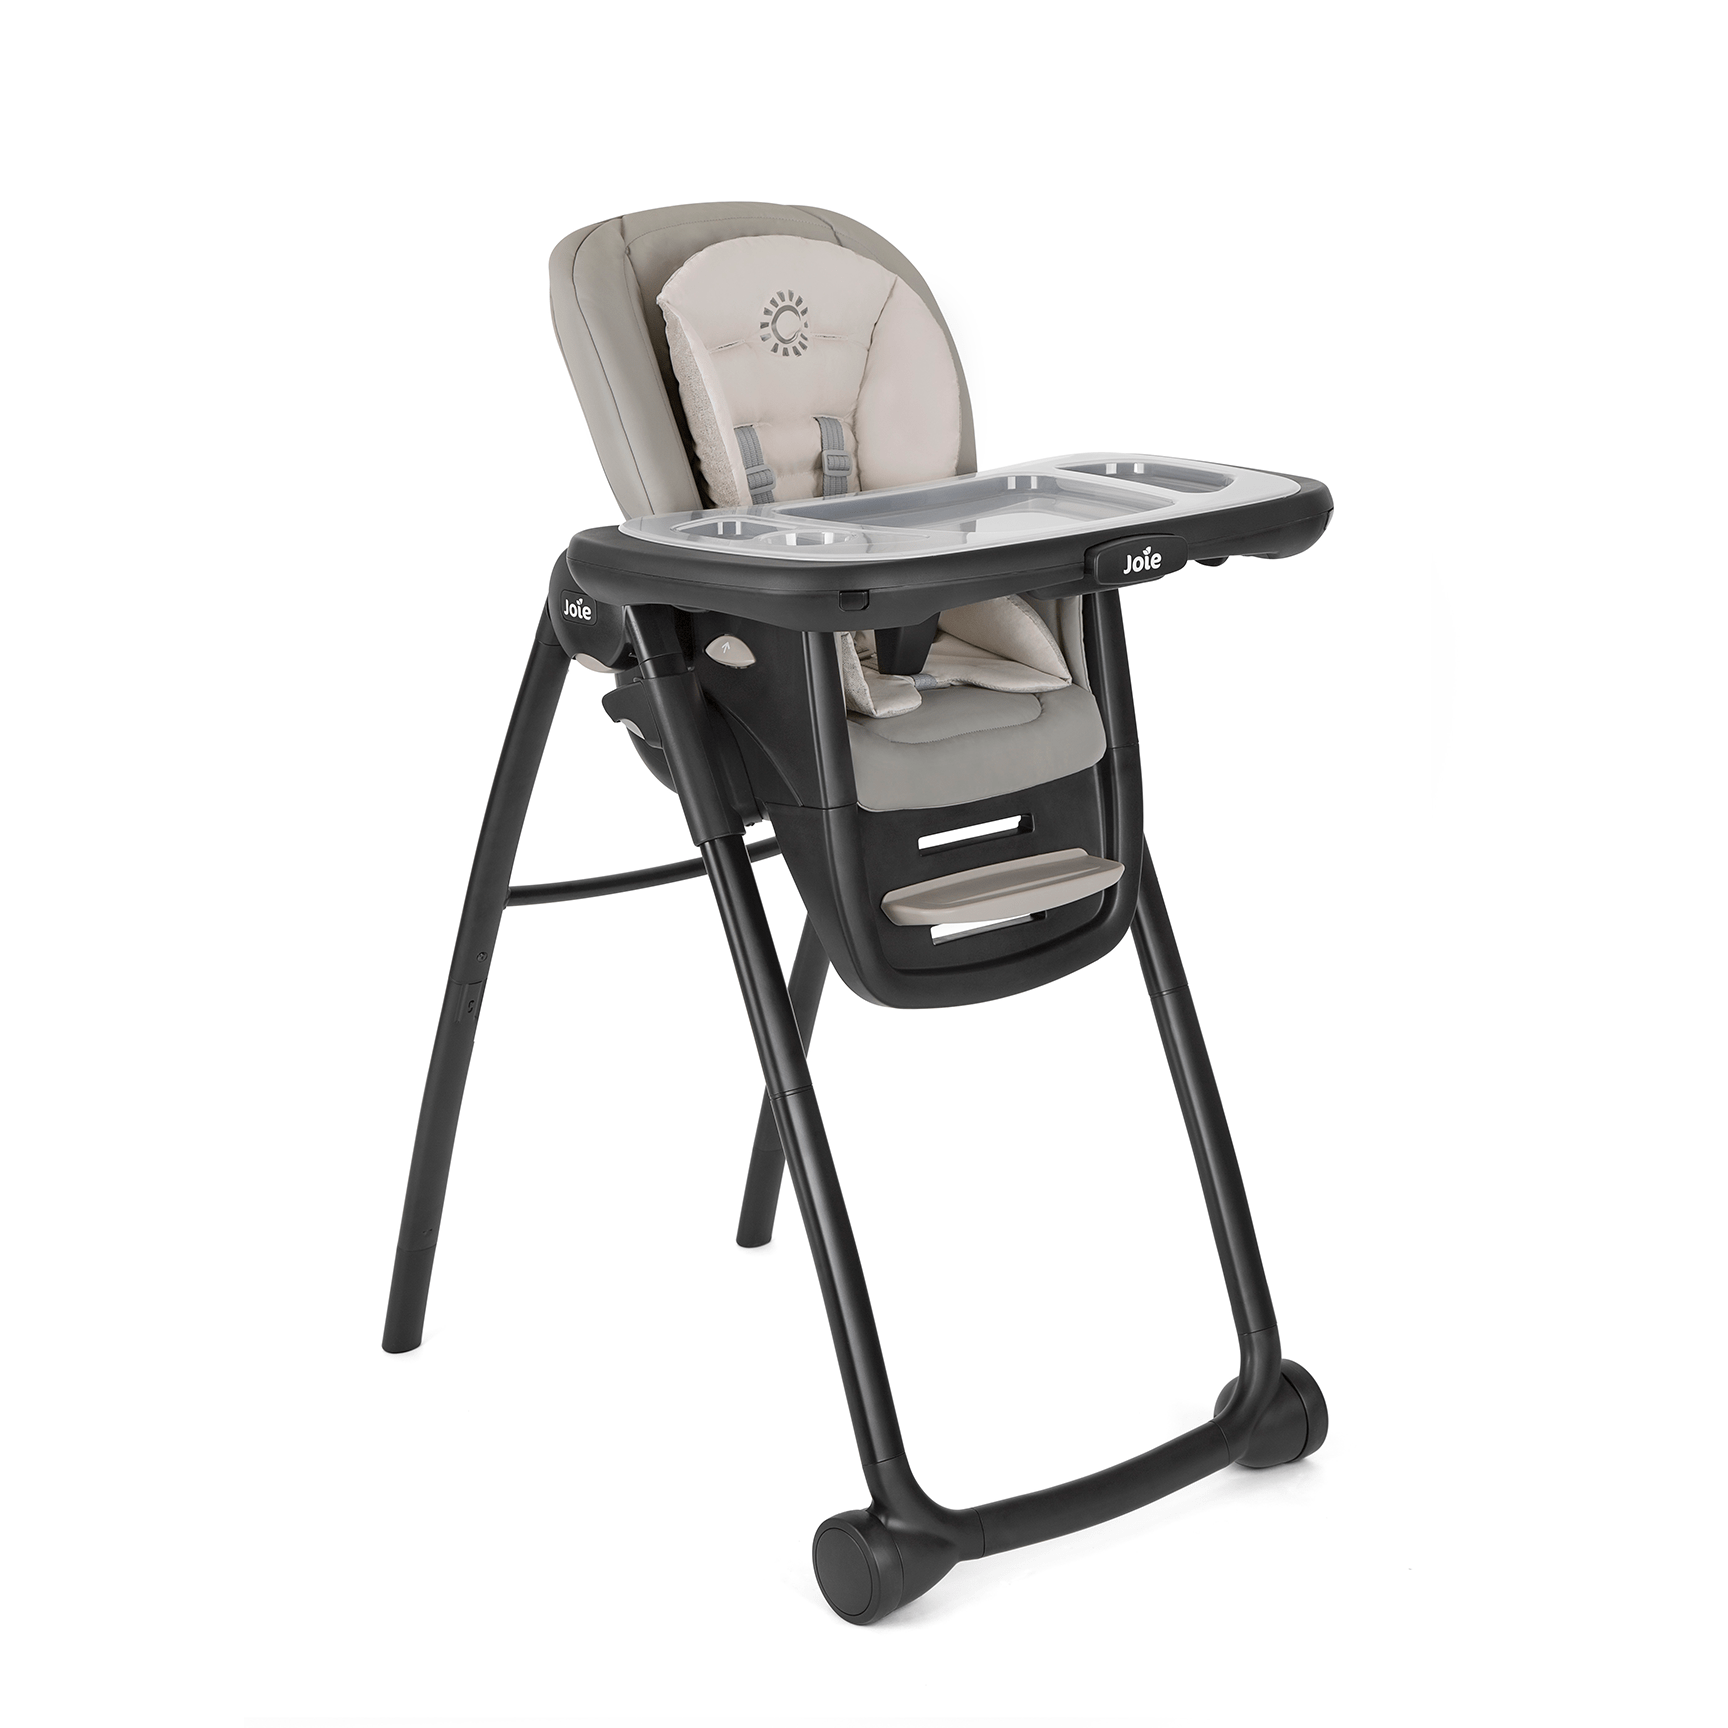 Joie baby highchairs Joie Multiply 6in1 Highchair - Speckled H1605AASPK000